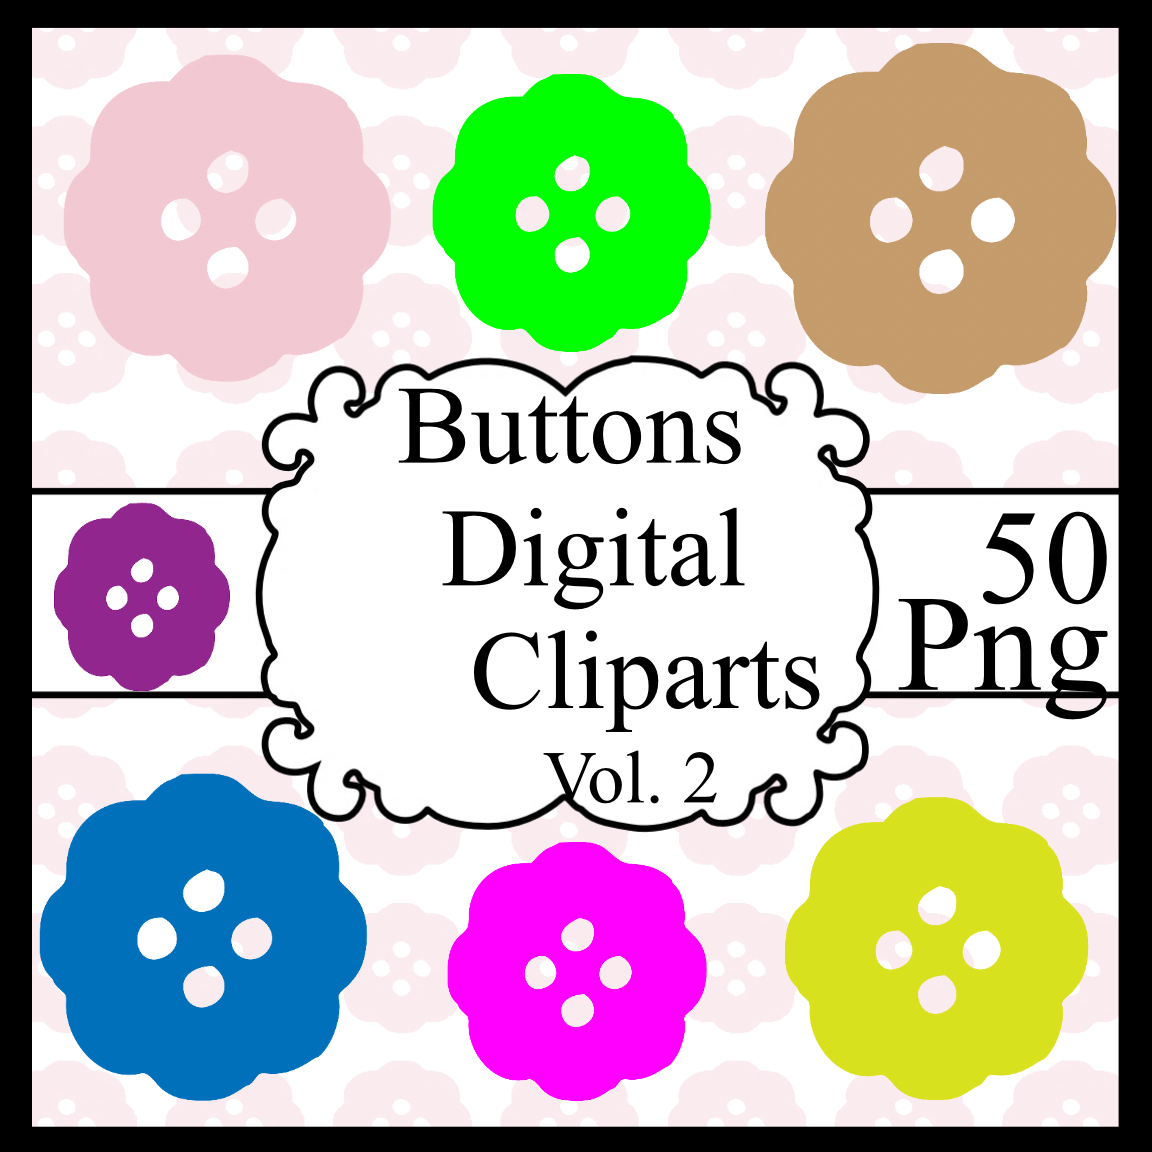 Primary image for Buttons Digital Cliparts Vol. 2